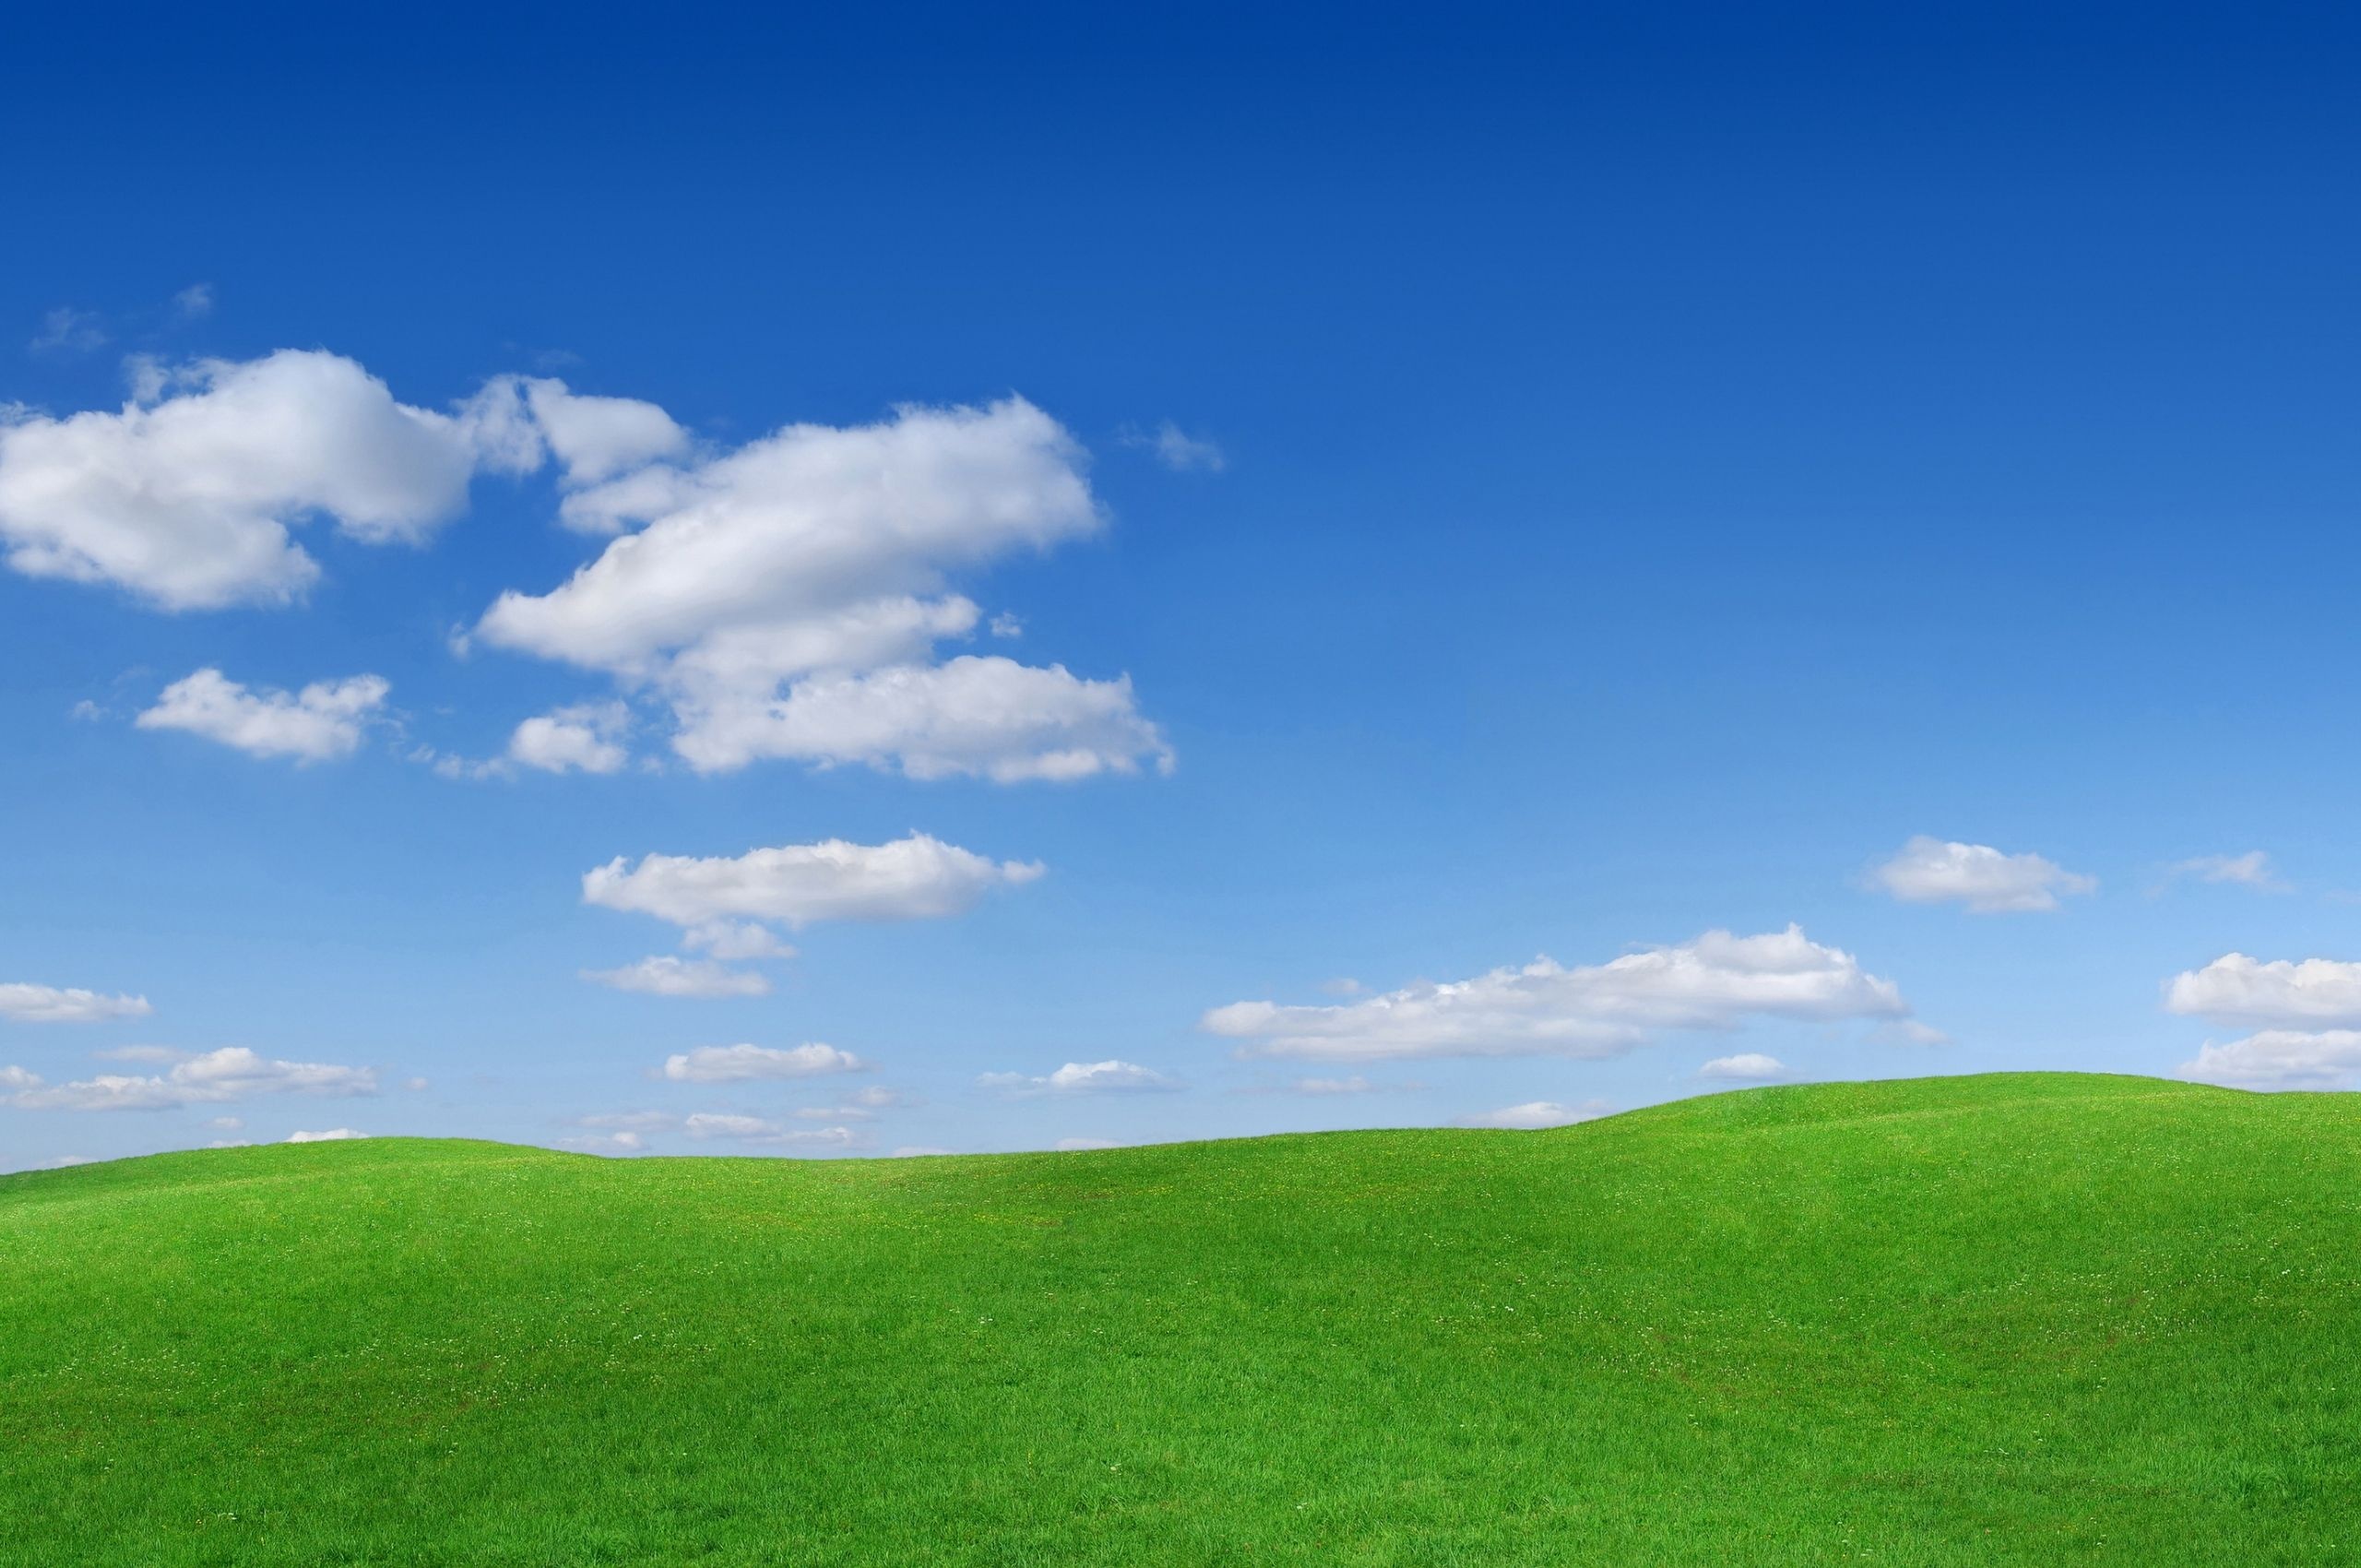 Grass and Sky: Field, In the open air, Serenity, Platteland, Land topography, Natural features. 2560x1700 HD Wallpaper.